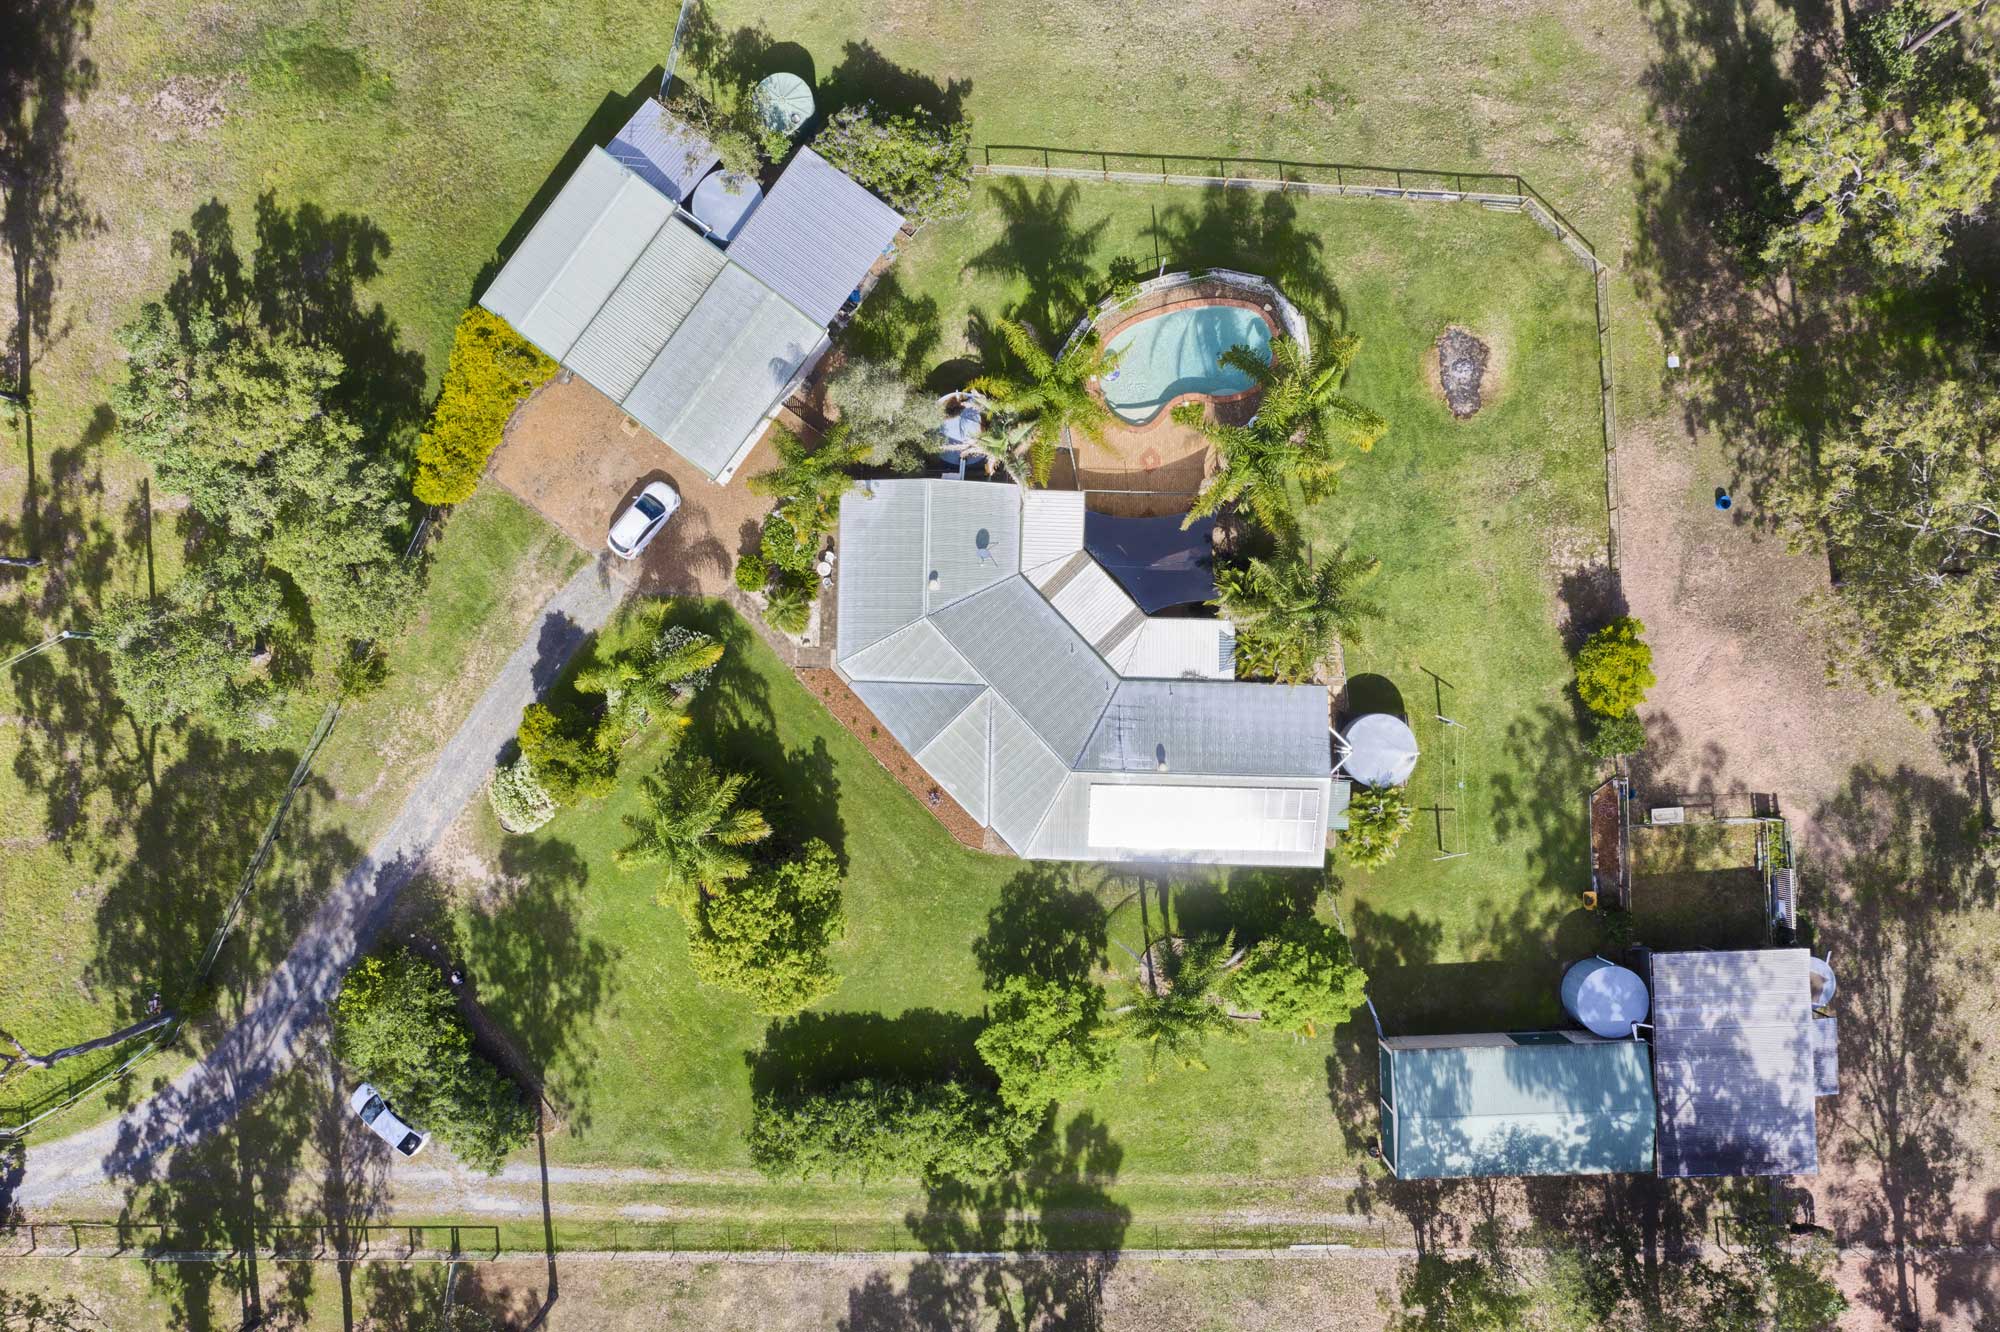 Drone photography at 1033 Teviot Rd Jimboomba for a new real estate listing